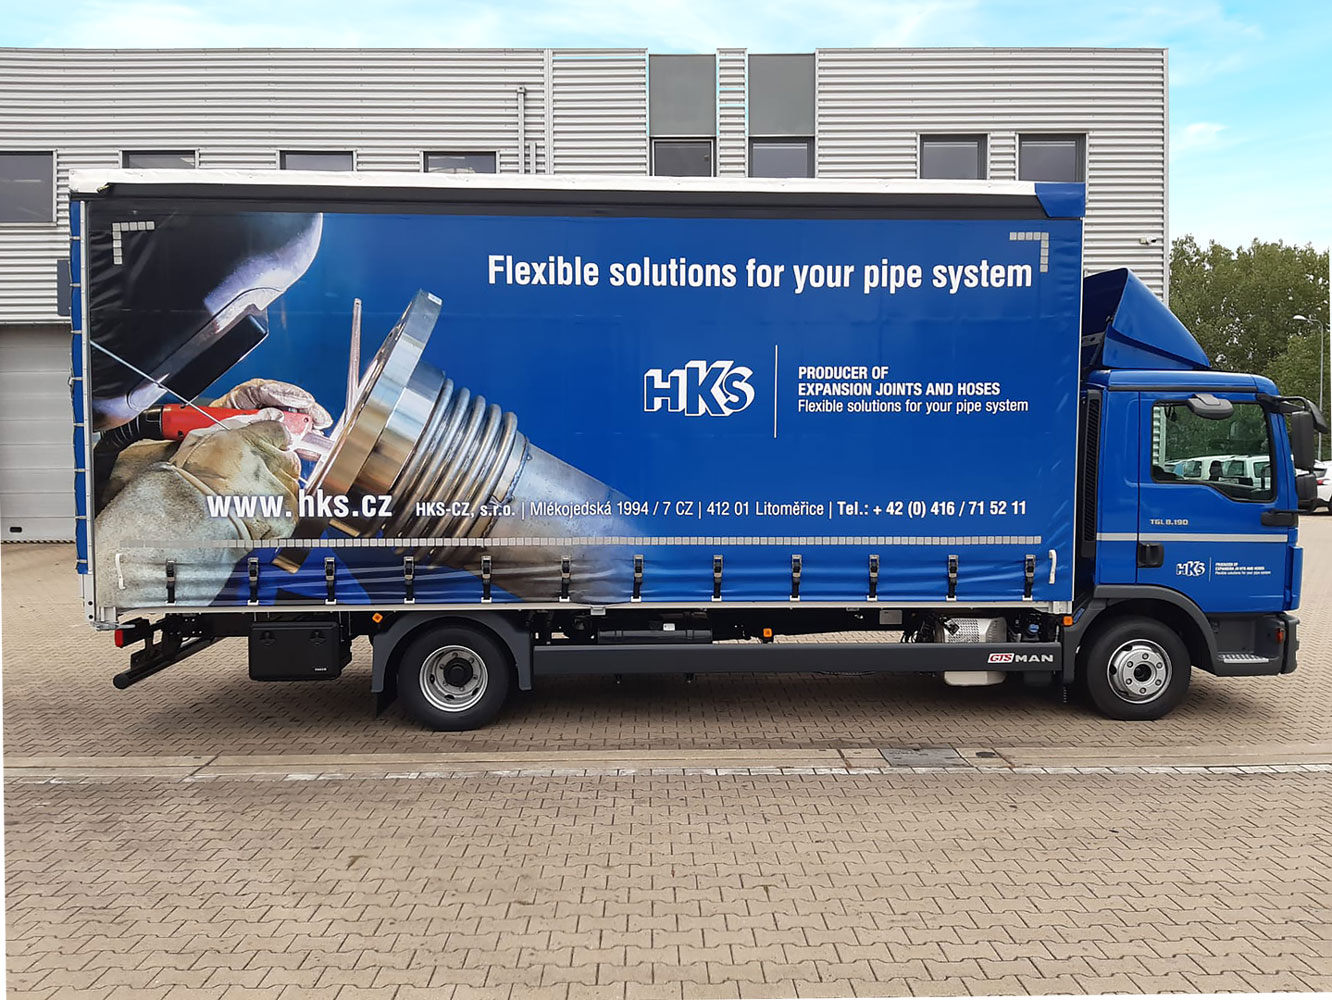 fahrzeuggestaltung-hks-flexible-solutions-for-your-pipe-system